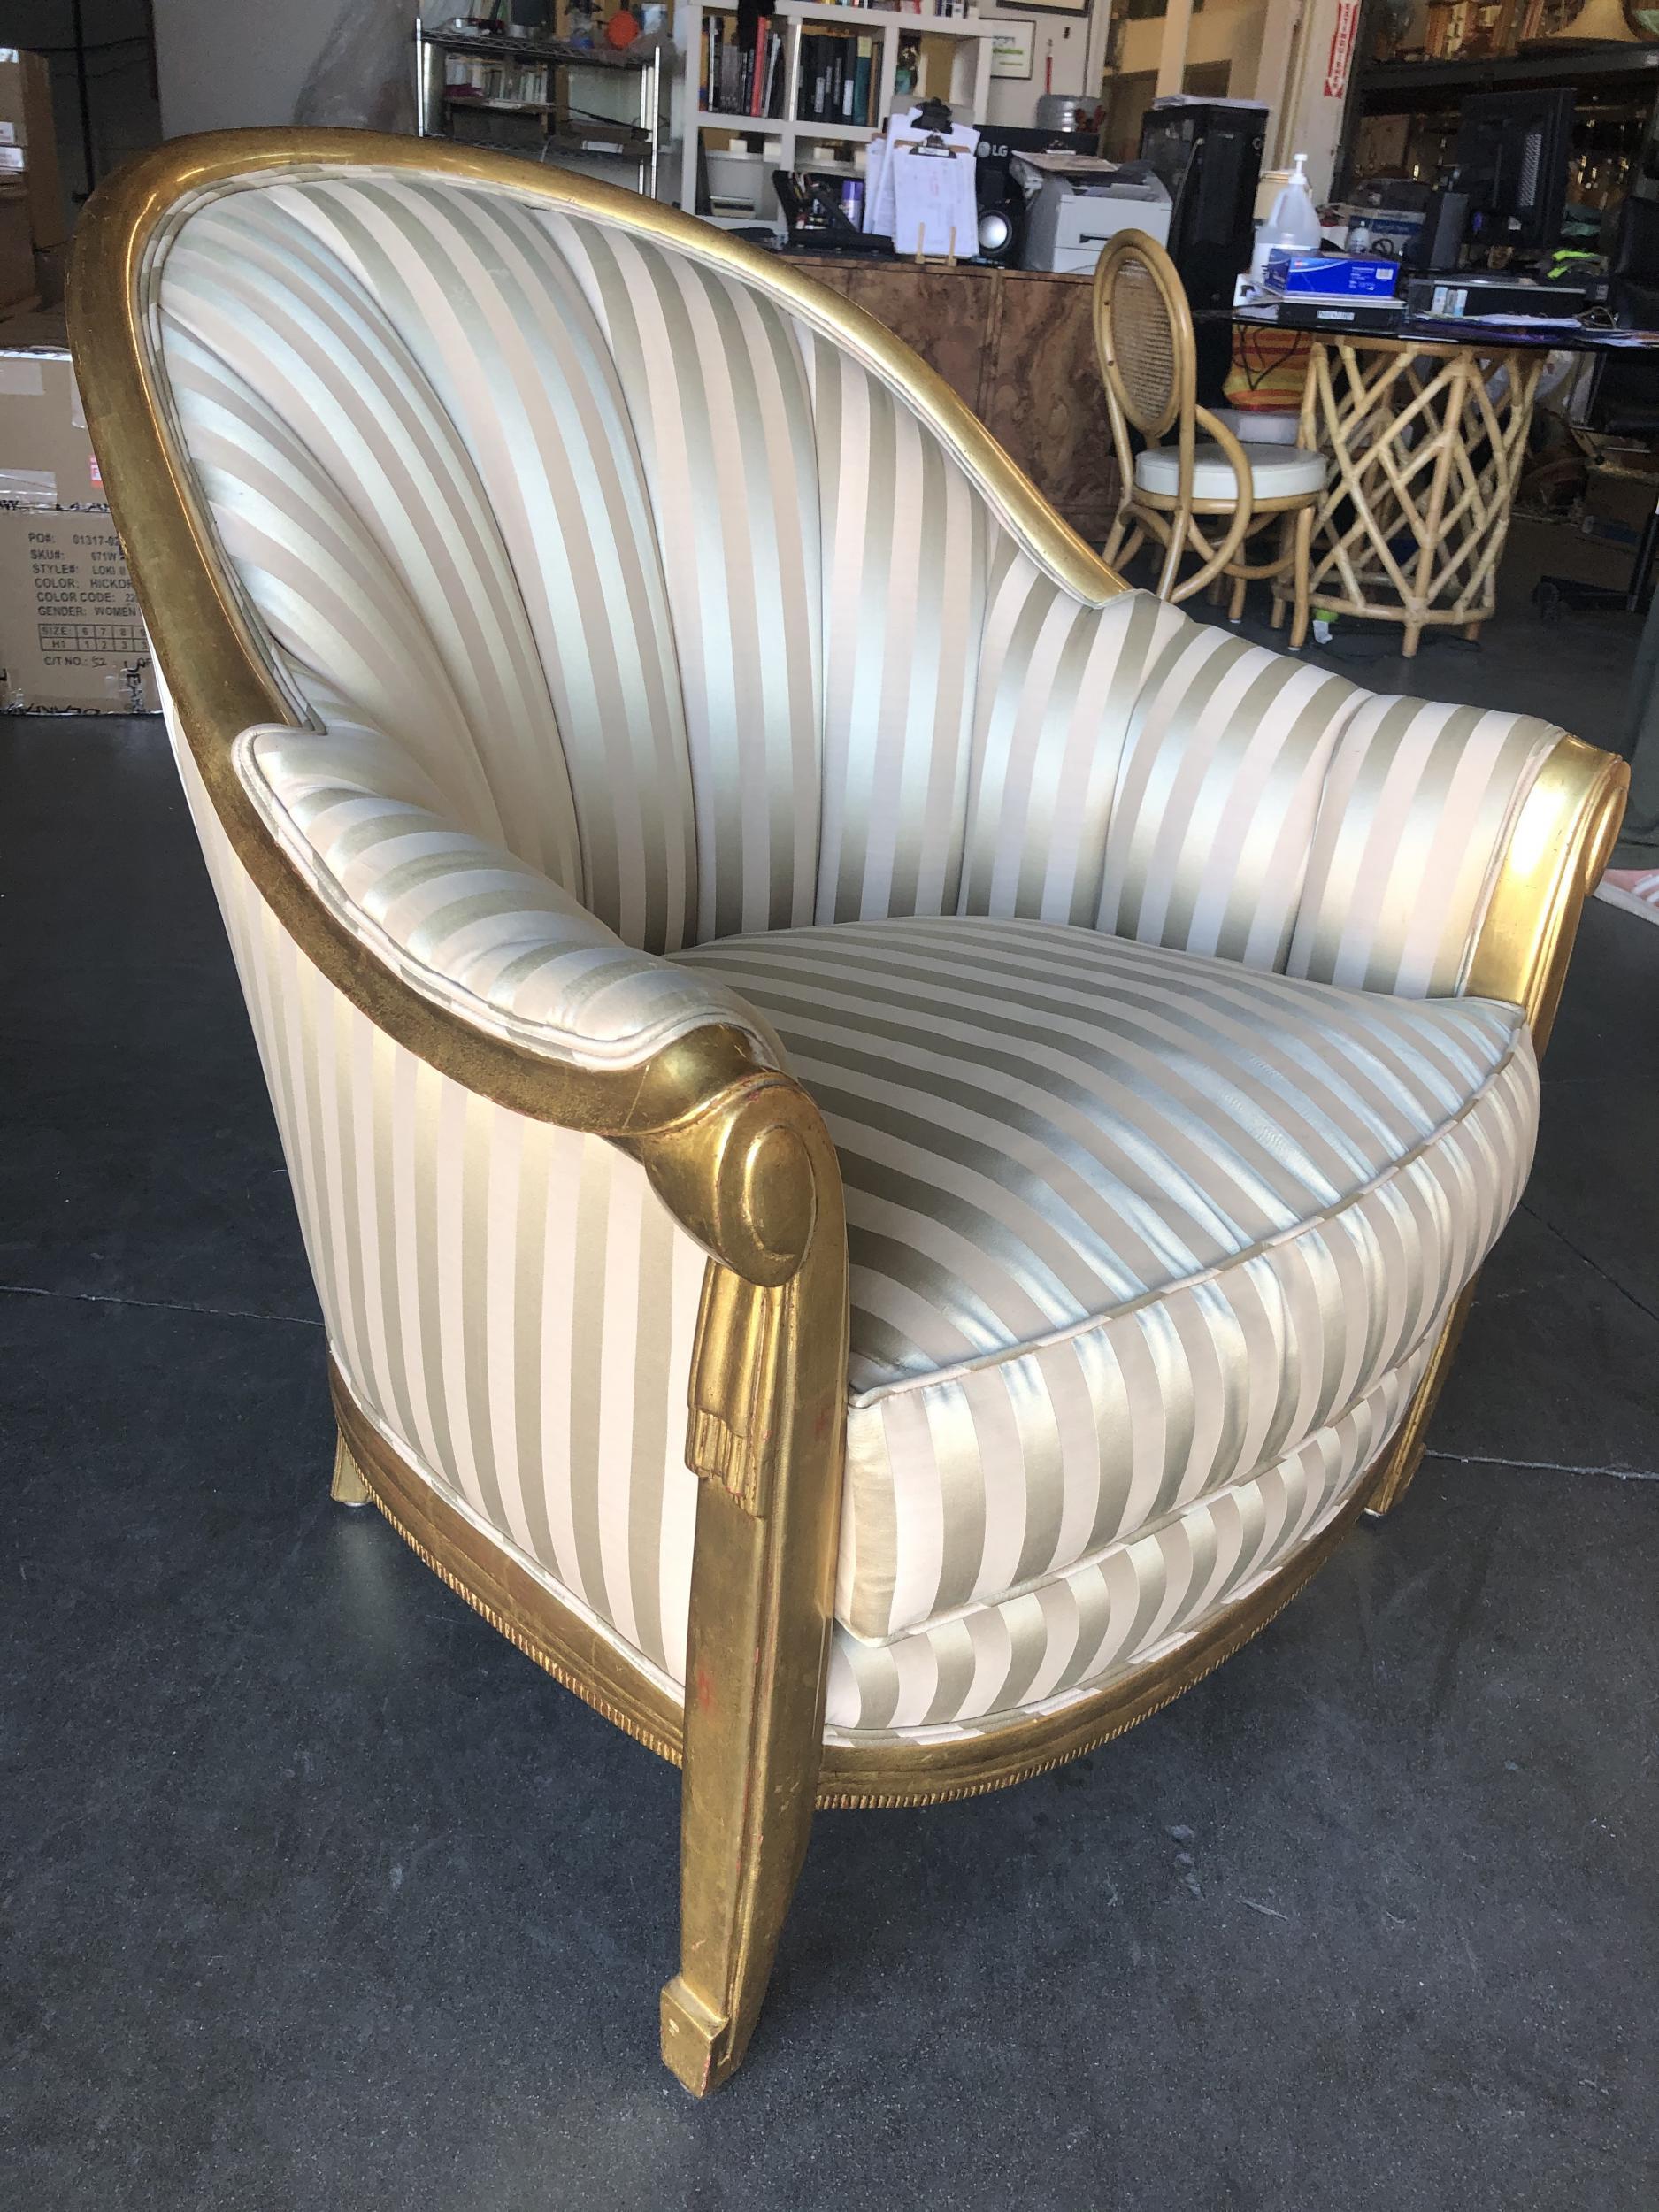 Hollywood Regency shell back lounge chair featuring a gold-painted frame with a cream-colored and silver striped covering.